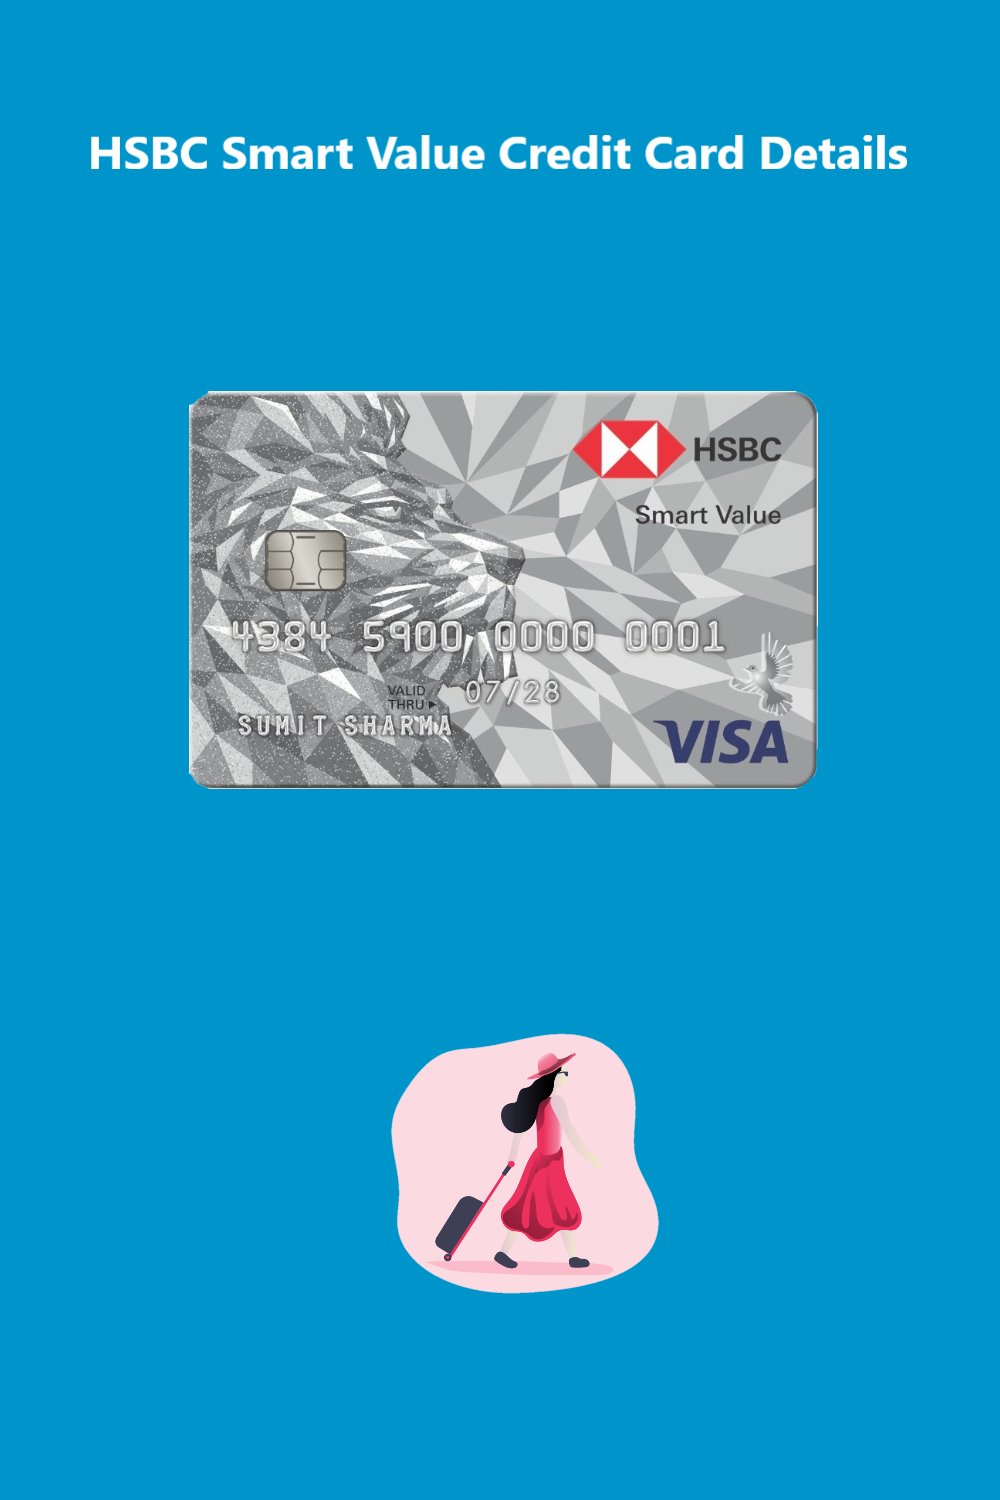 HSBC Smart Value Credit Card: Check Offers & Benefits